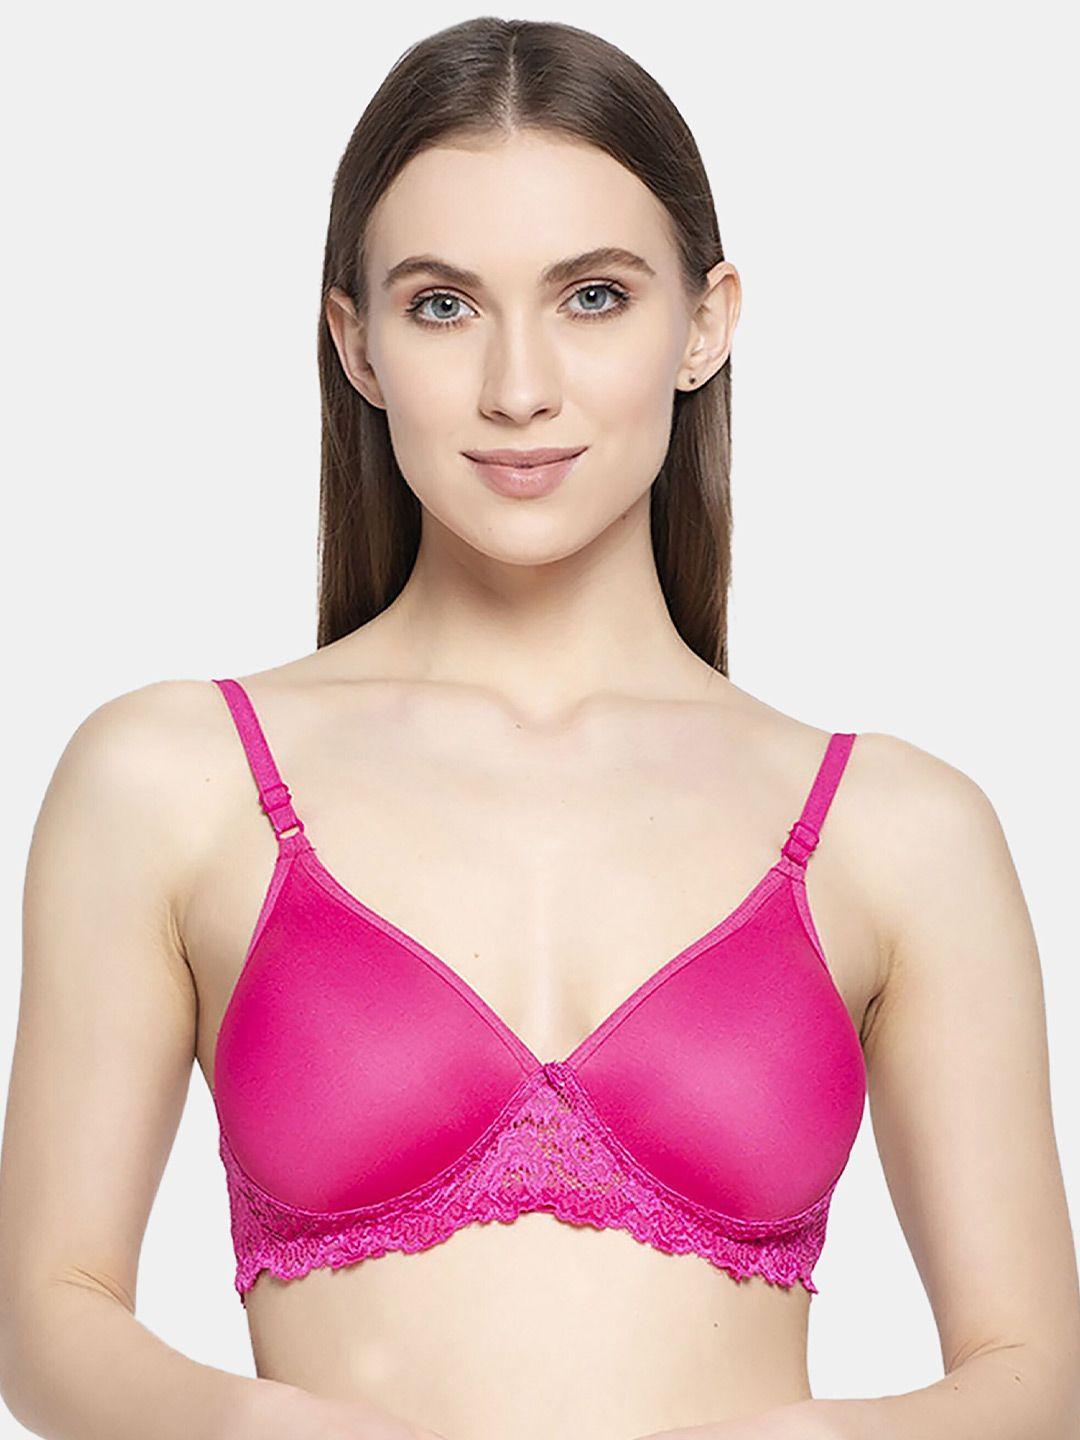 arousy-floral-lace-seamless-non-padded-full-coverage-organic-cotton-bra